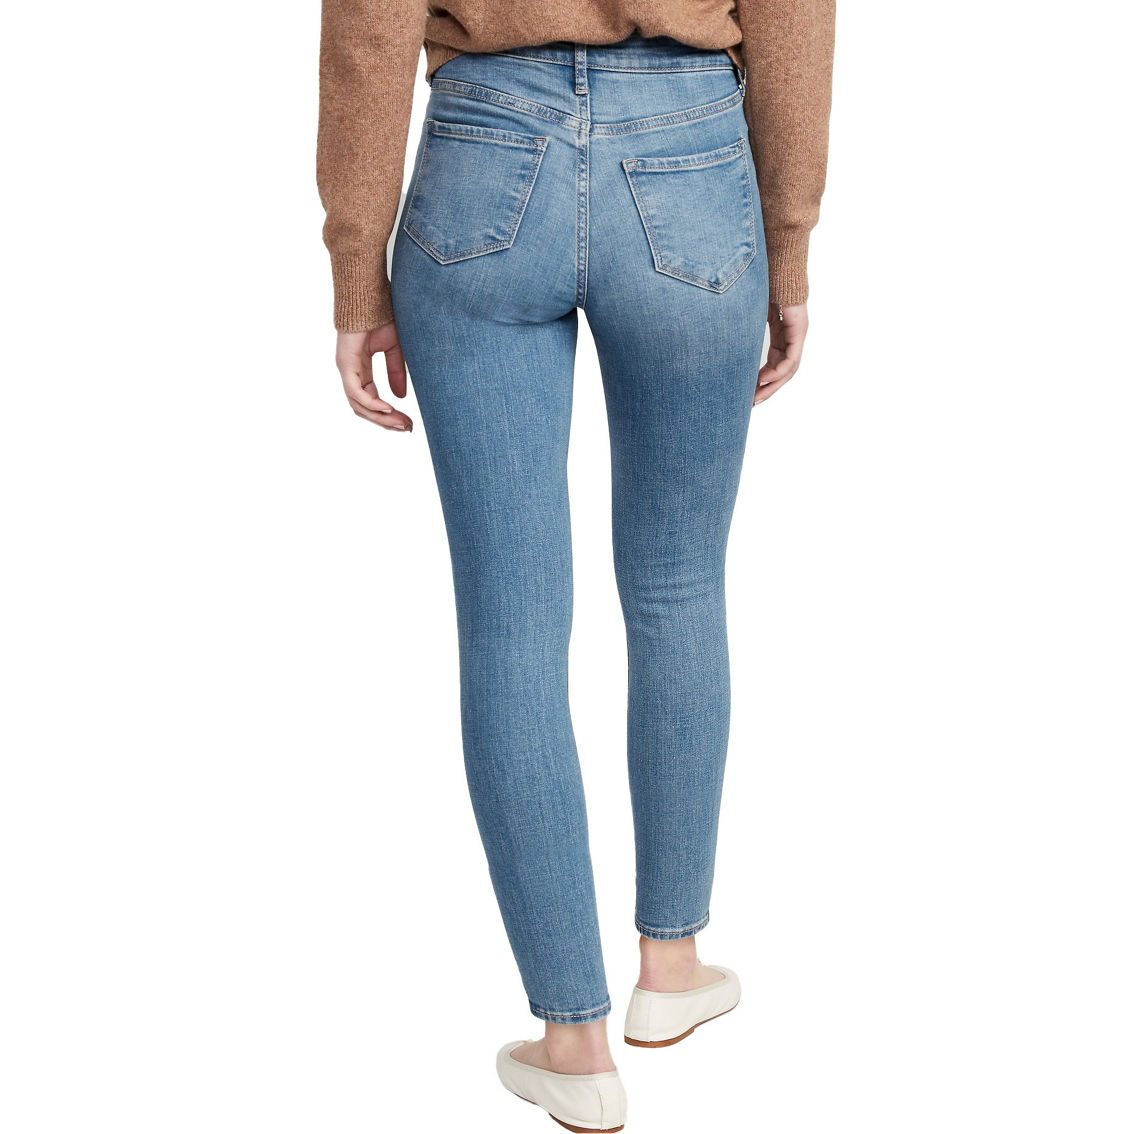 Old Navy High Rise Rockstar Jeans, Medium Authentic | Jeans | Clothing ...